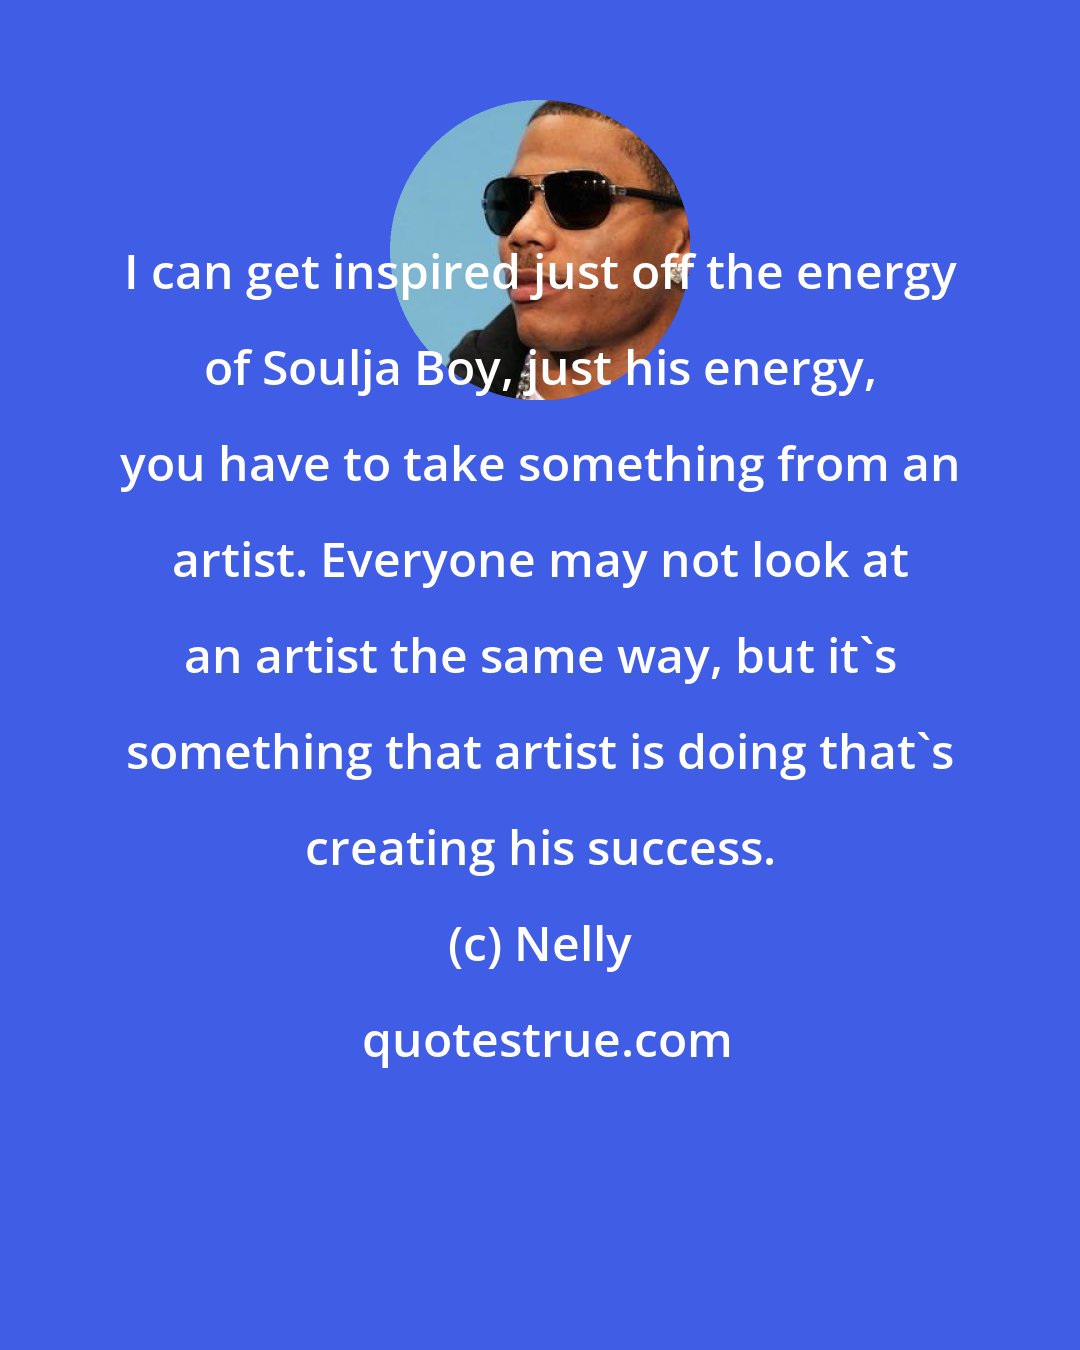 Nelly: I can get inspired just off the energy of Soulja Boy, just his energy, you have to take something from an artist. Everyone may not look at an artist the same way, but it's something that artist is doing that's creating his success.